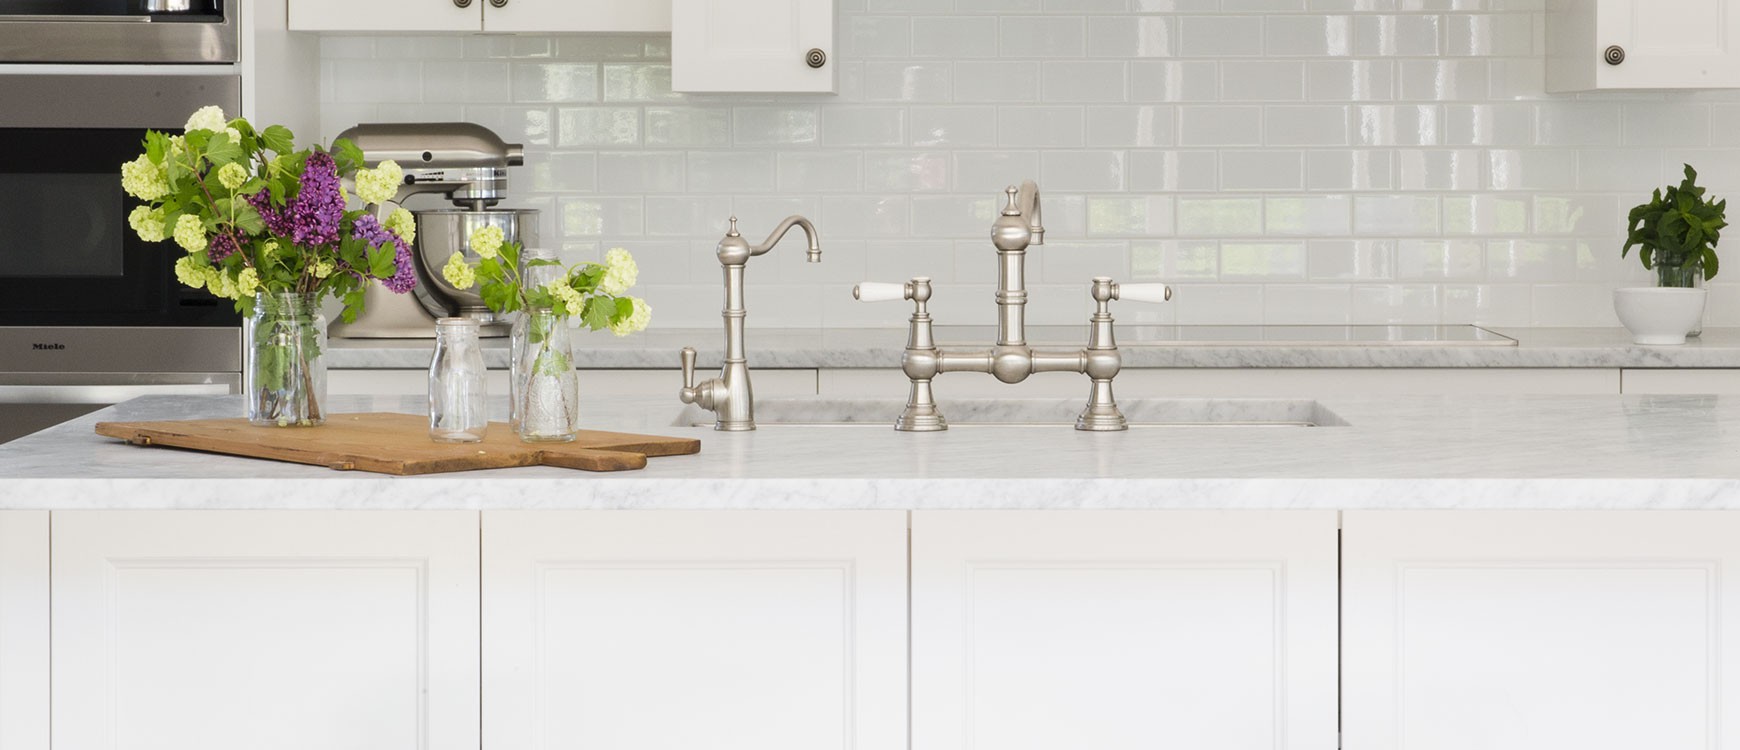 Buy Traditional Kitchen Taps Online Quality Stylish Tapware Made In The Uk The English Tapware Company